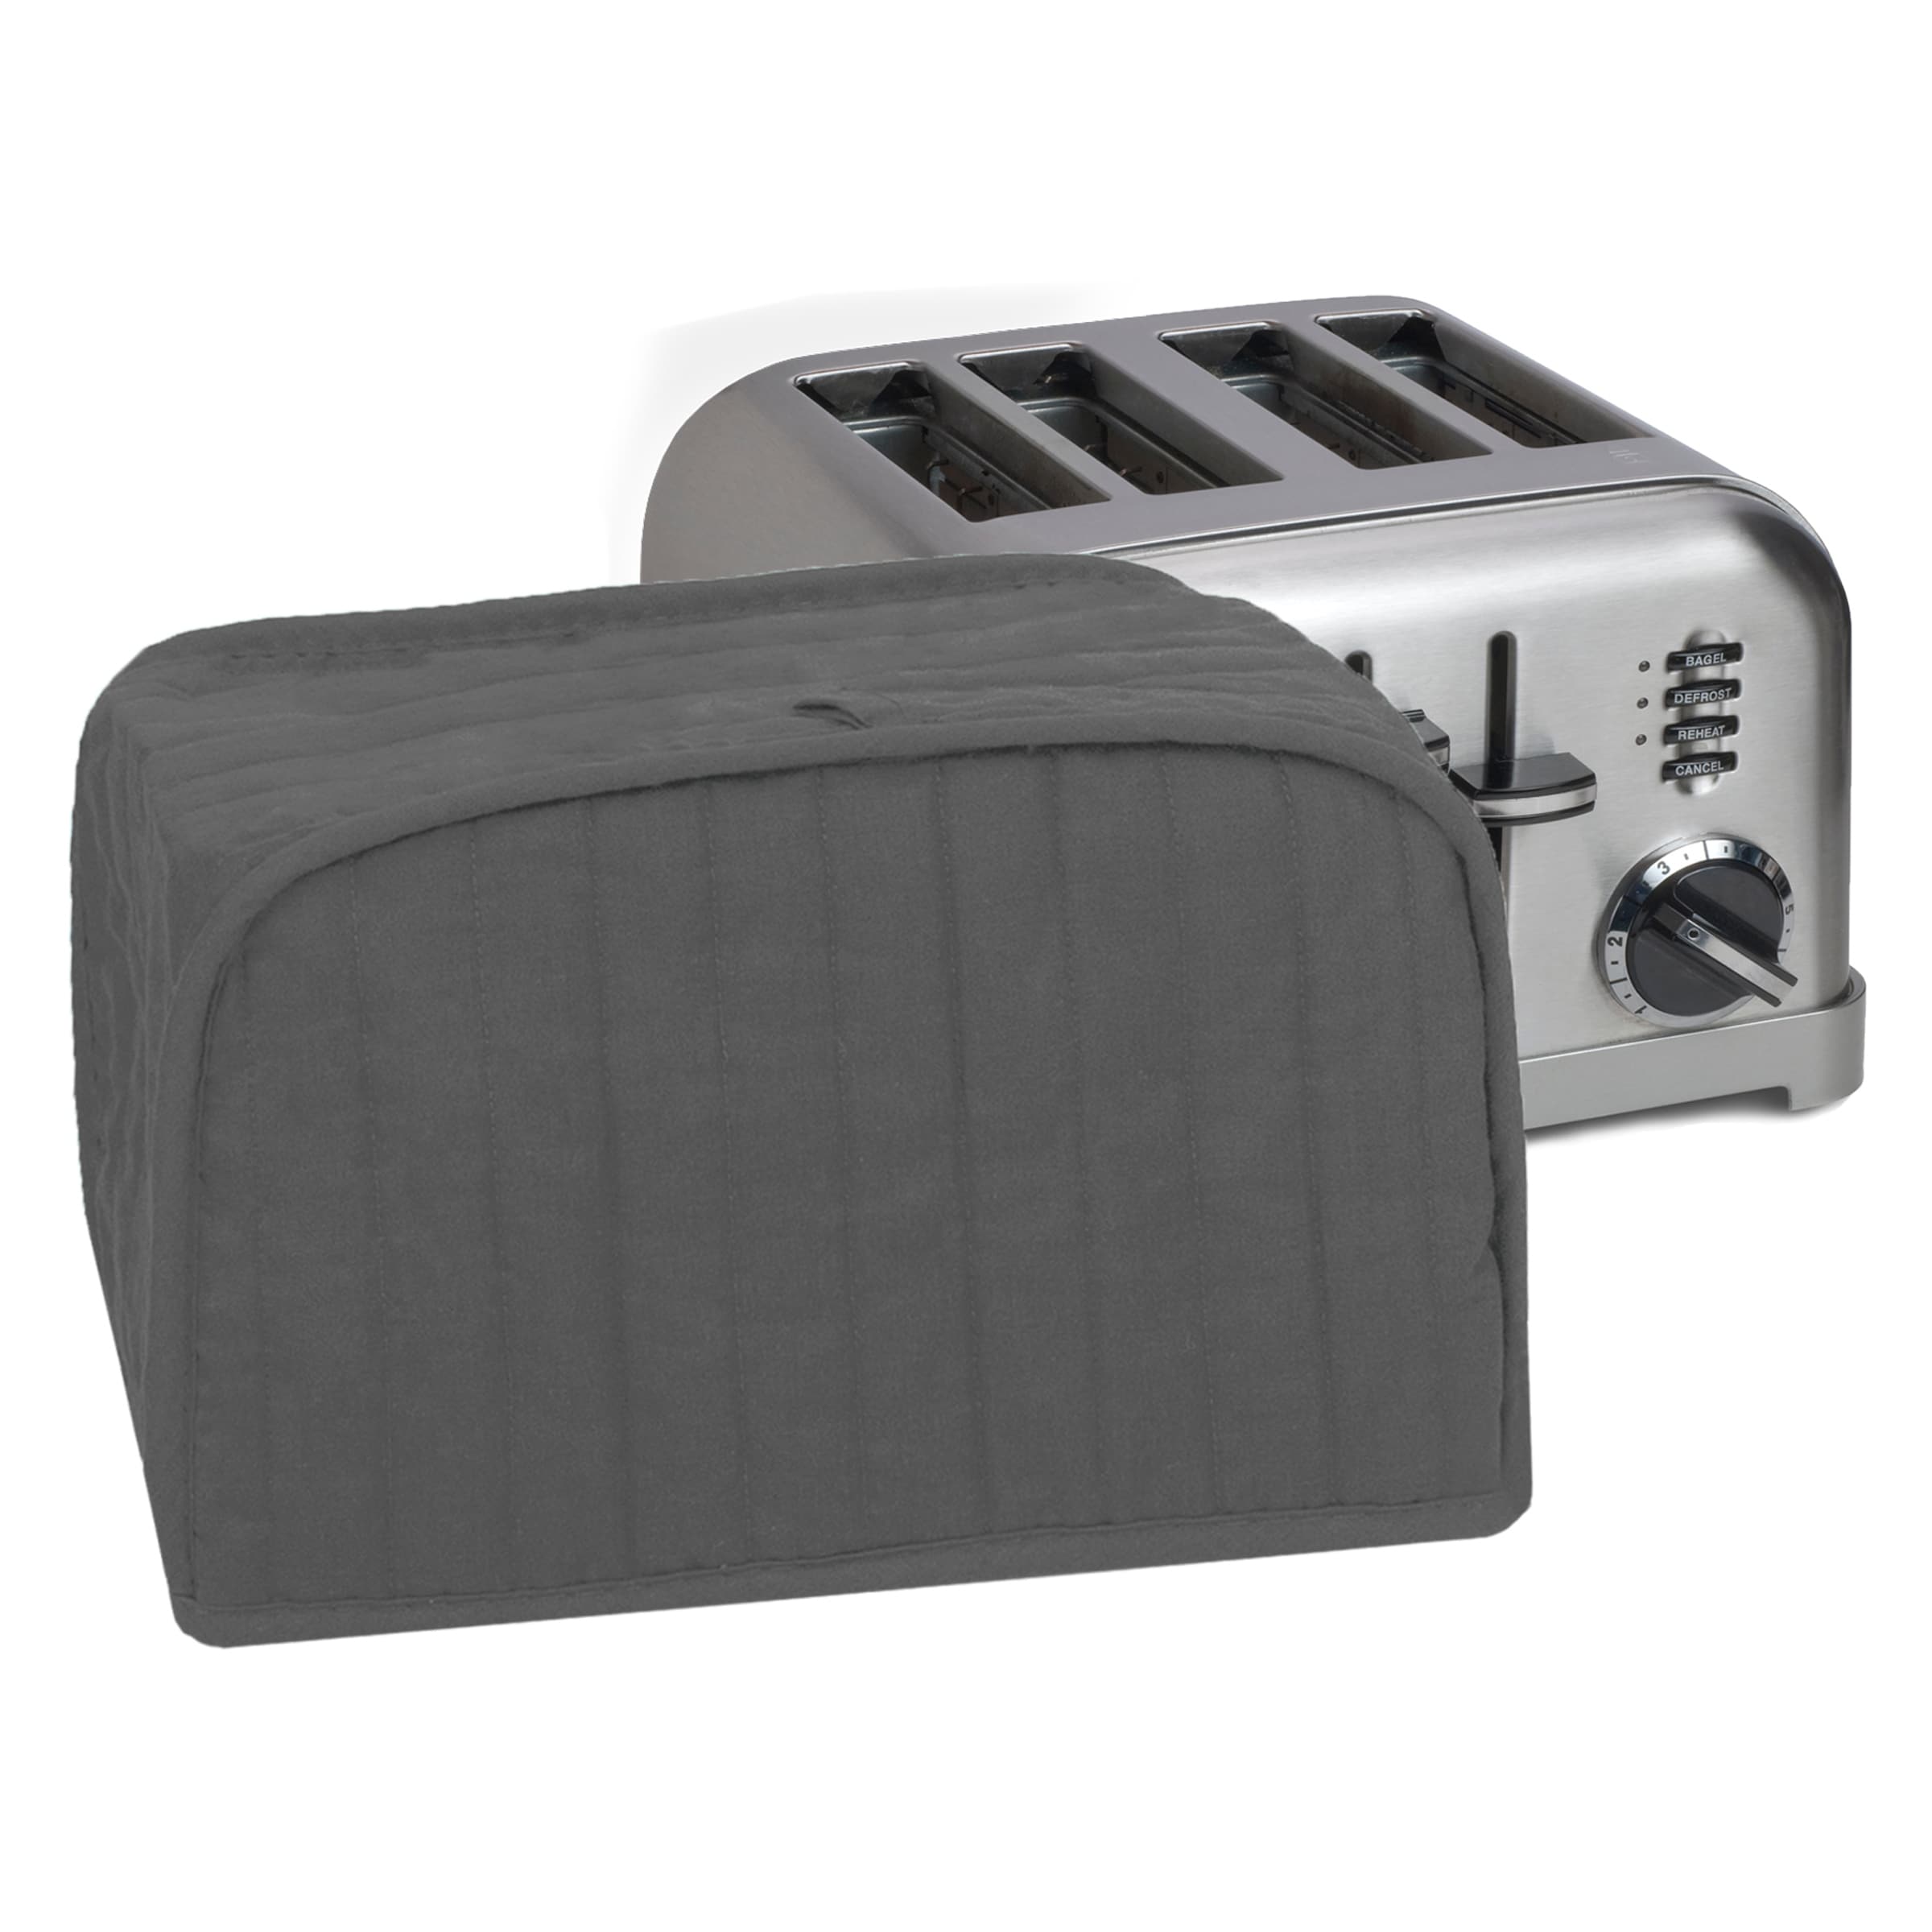 https://ak1.ostkcdn.com/images/products/is/images/direct/0a5dff8440fa73a4d9bd623d00c2c6c2d3aa5b29/Solid-Graphite-Four-Slice-Toaster-Cover%2C-Appliance-Not-Included.jpg